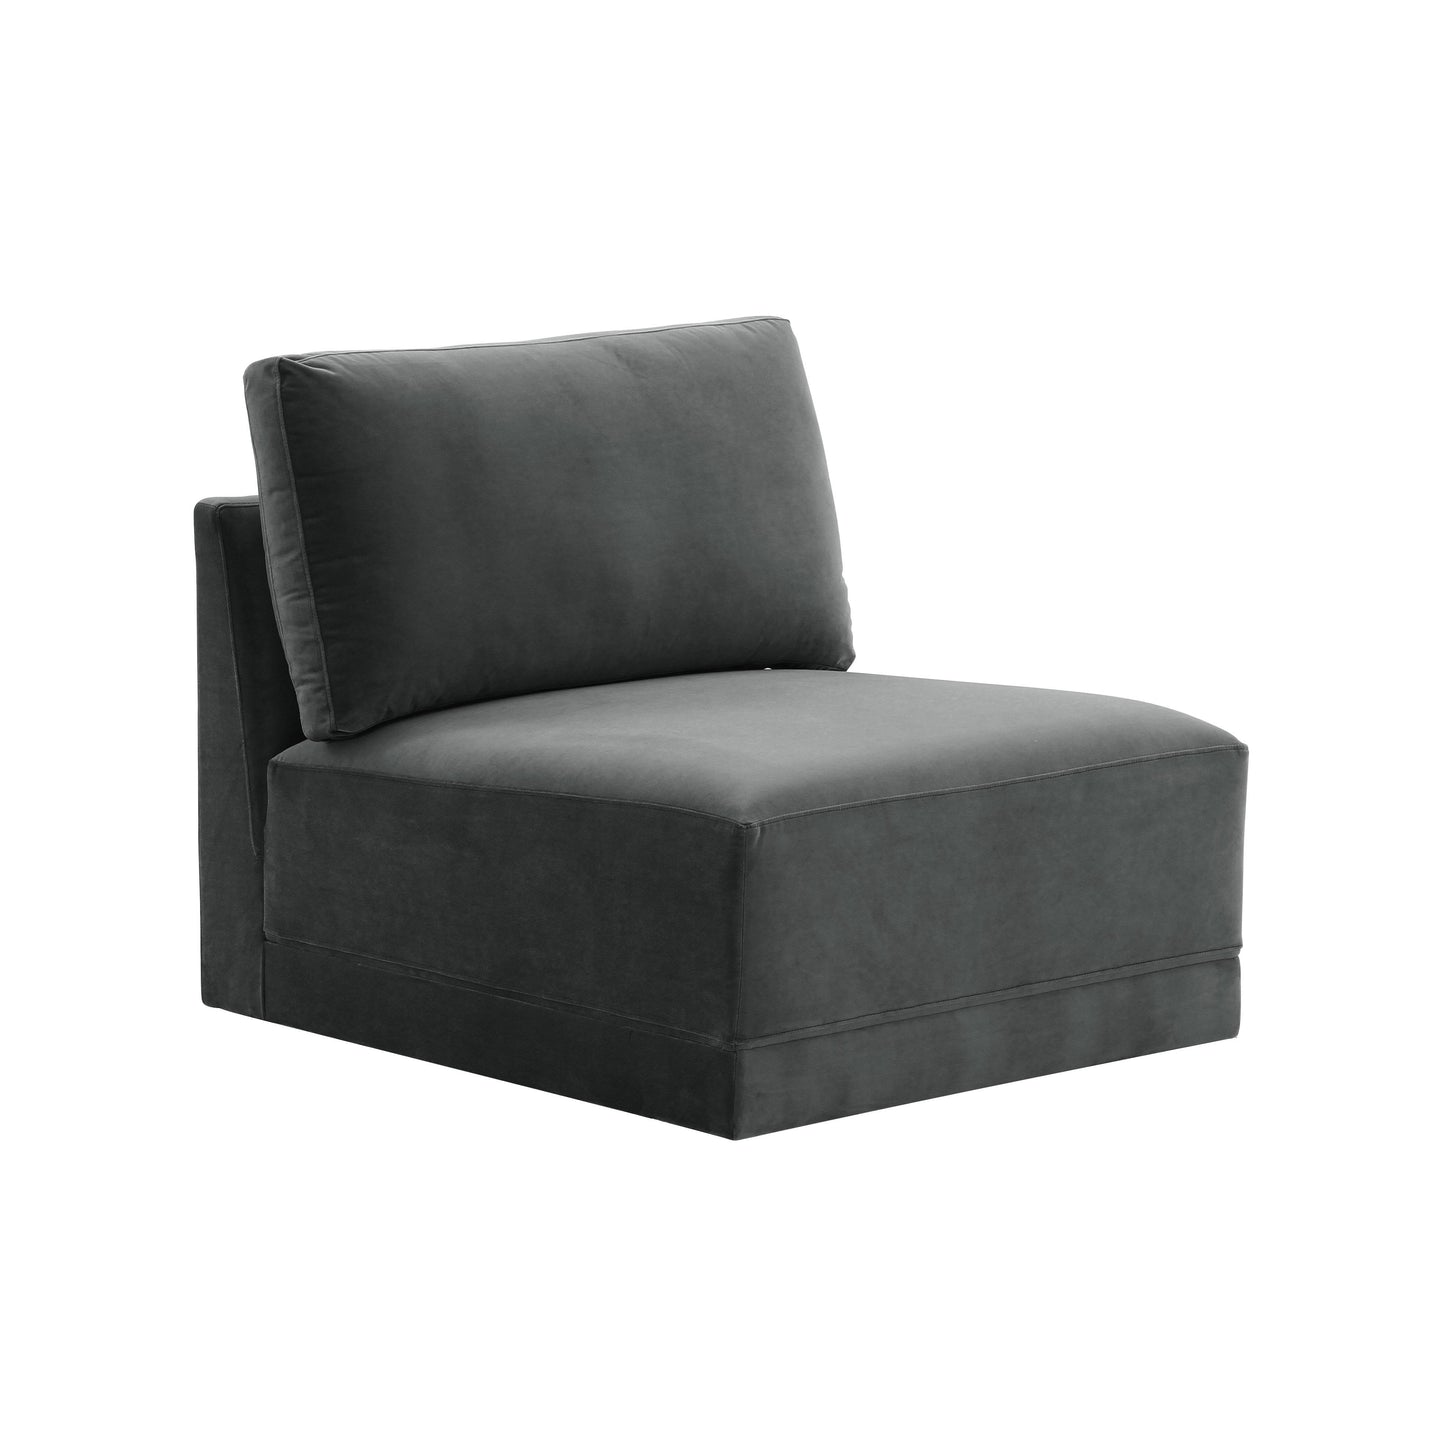 Tov Furniture Willow Charcoal Armless Chair